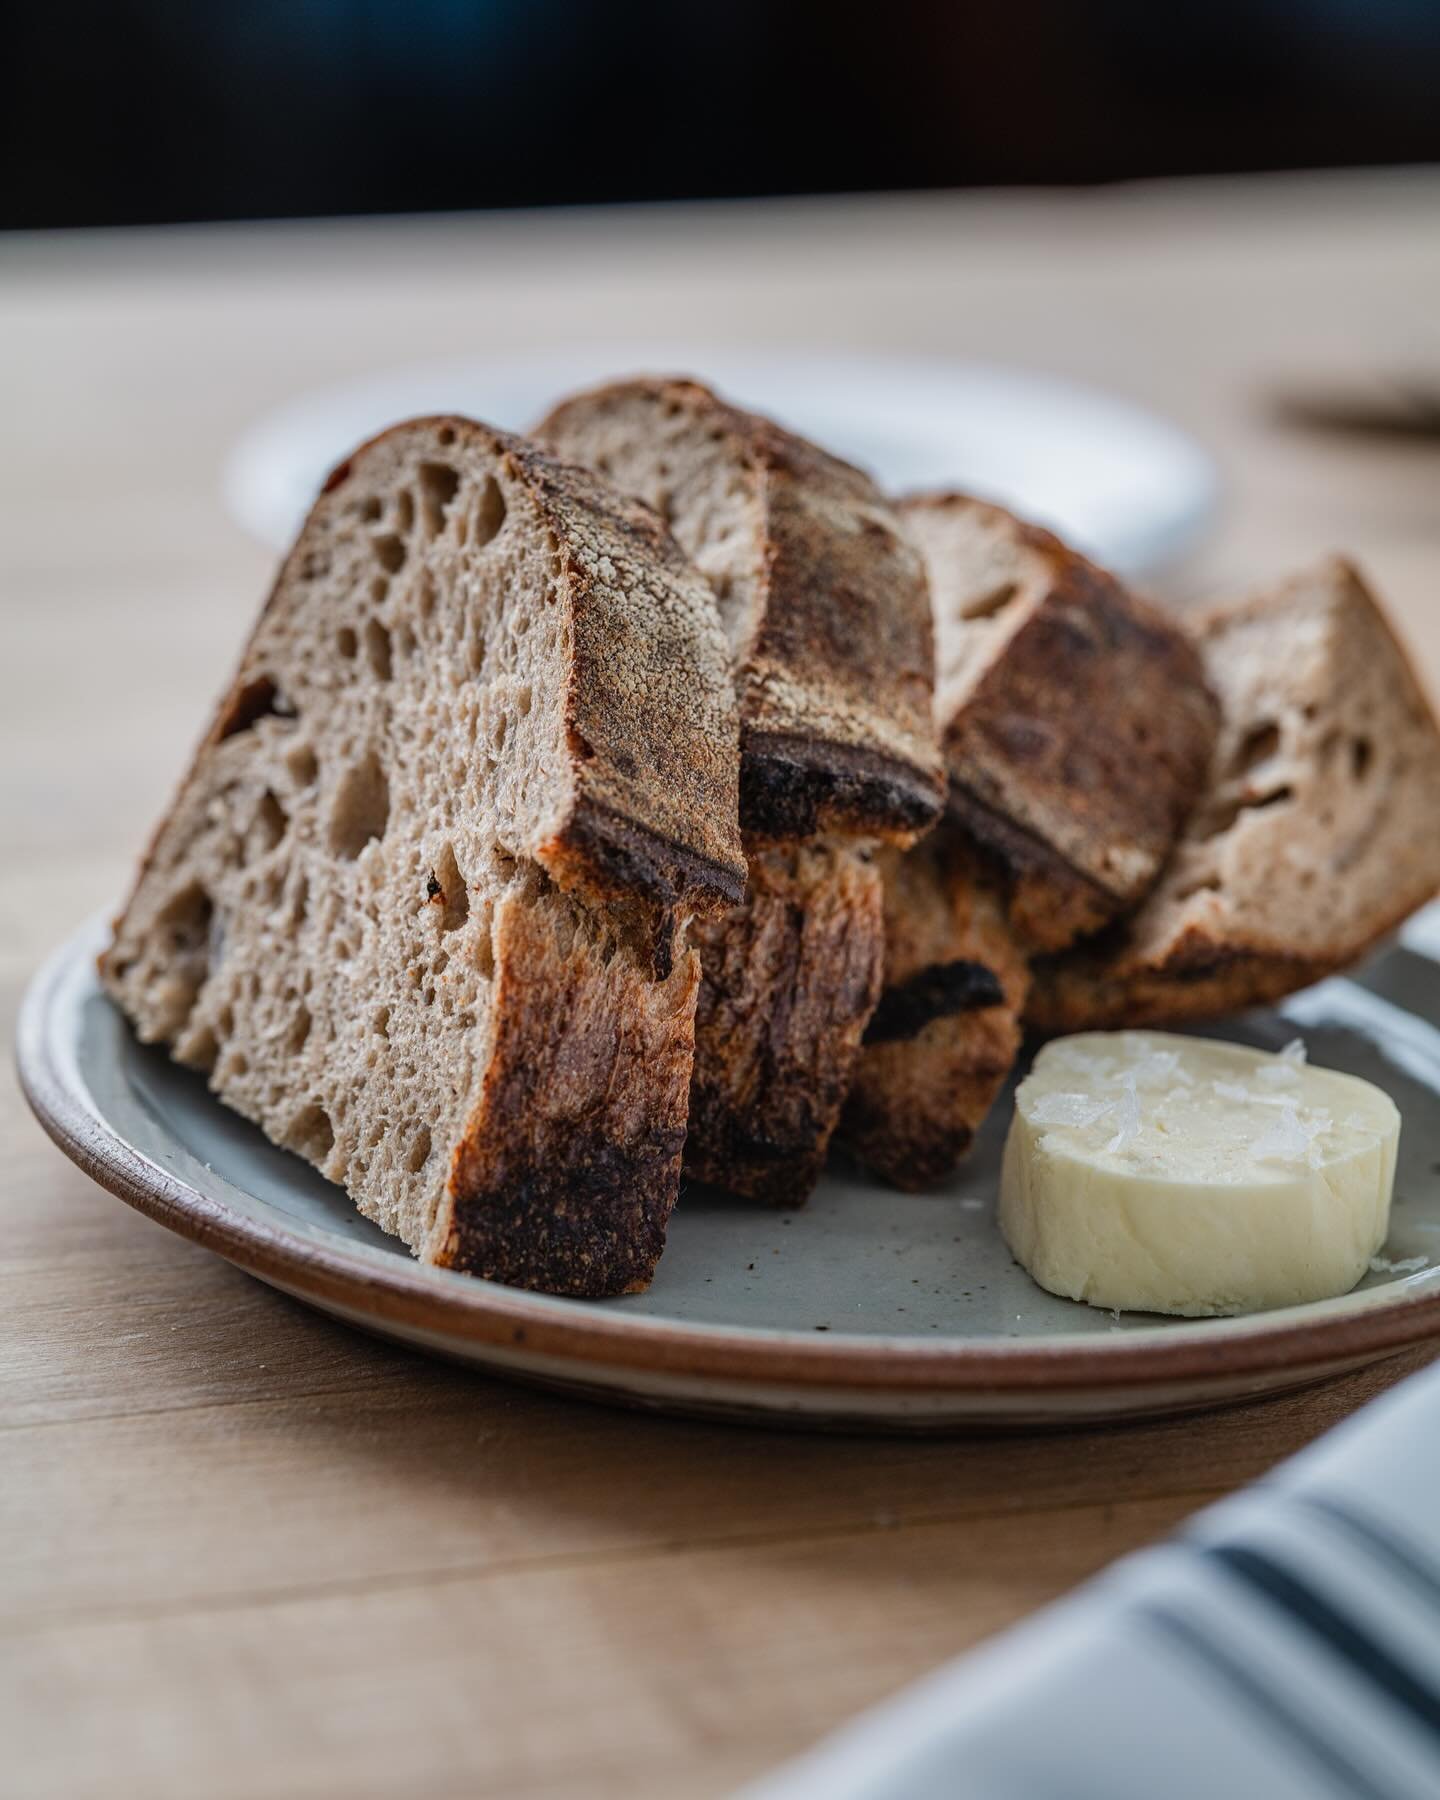 Don&rsquo;t sleep on the house-made sourdough. 

For five and a half years we&rsquo;ve baked every loaf ourselves. It&rsquo;s a labor of love.

Doors open 5-9. Live Jazz 6:00-8:30.

#bakerstable #bakerstablenewport #feedpeoplewithlove #sourdough #bre